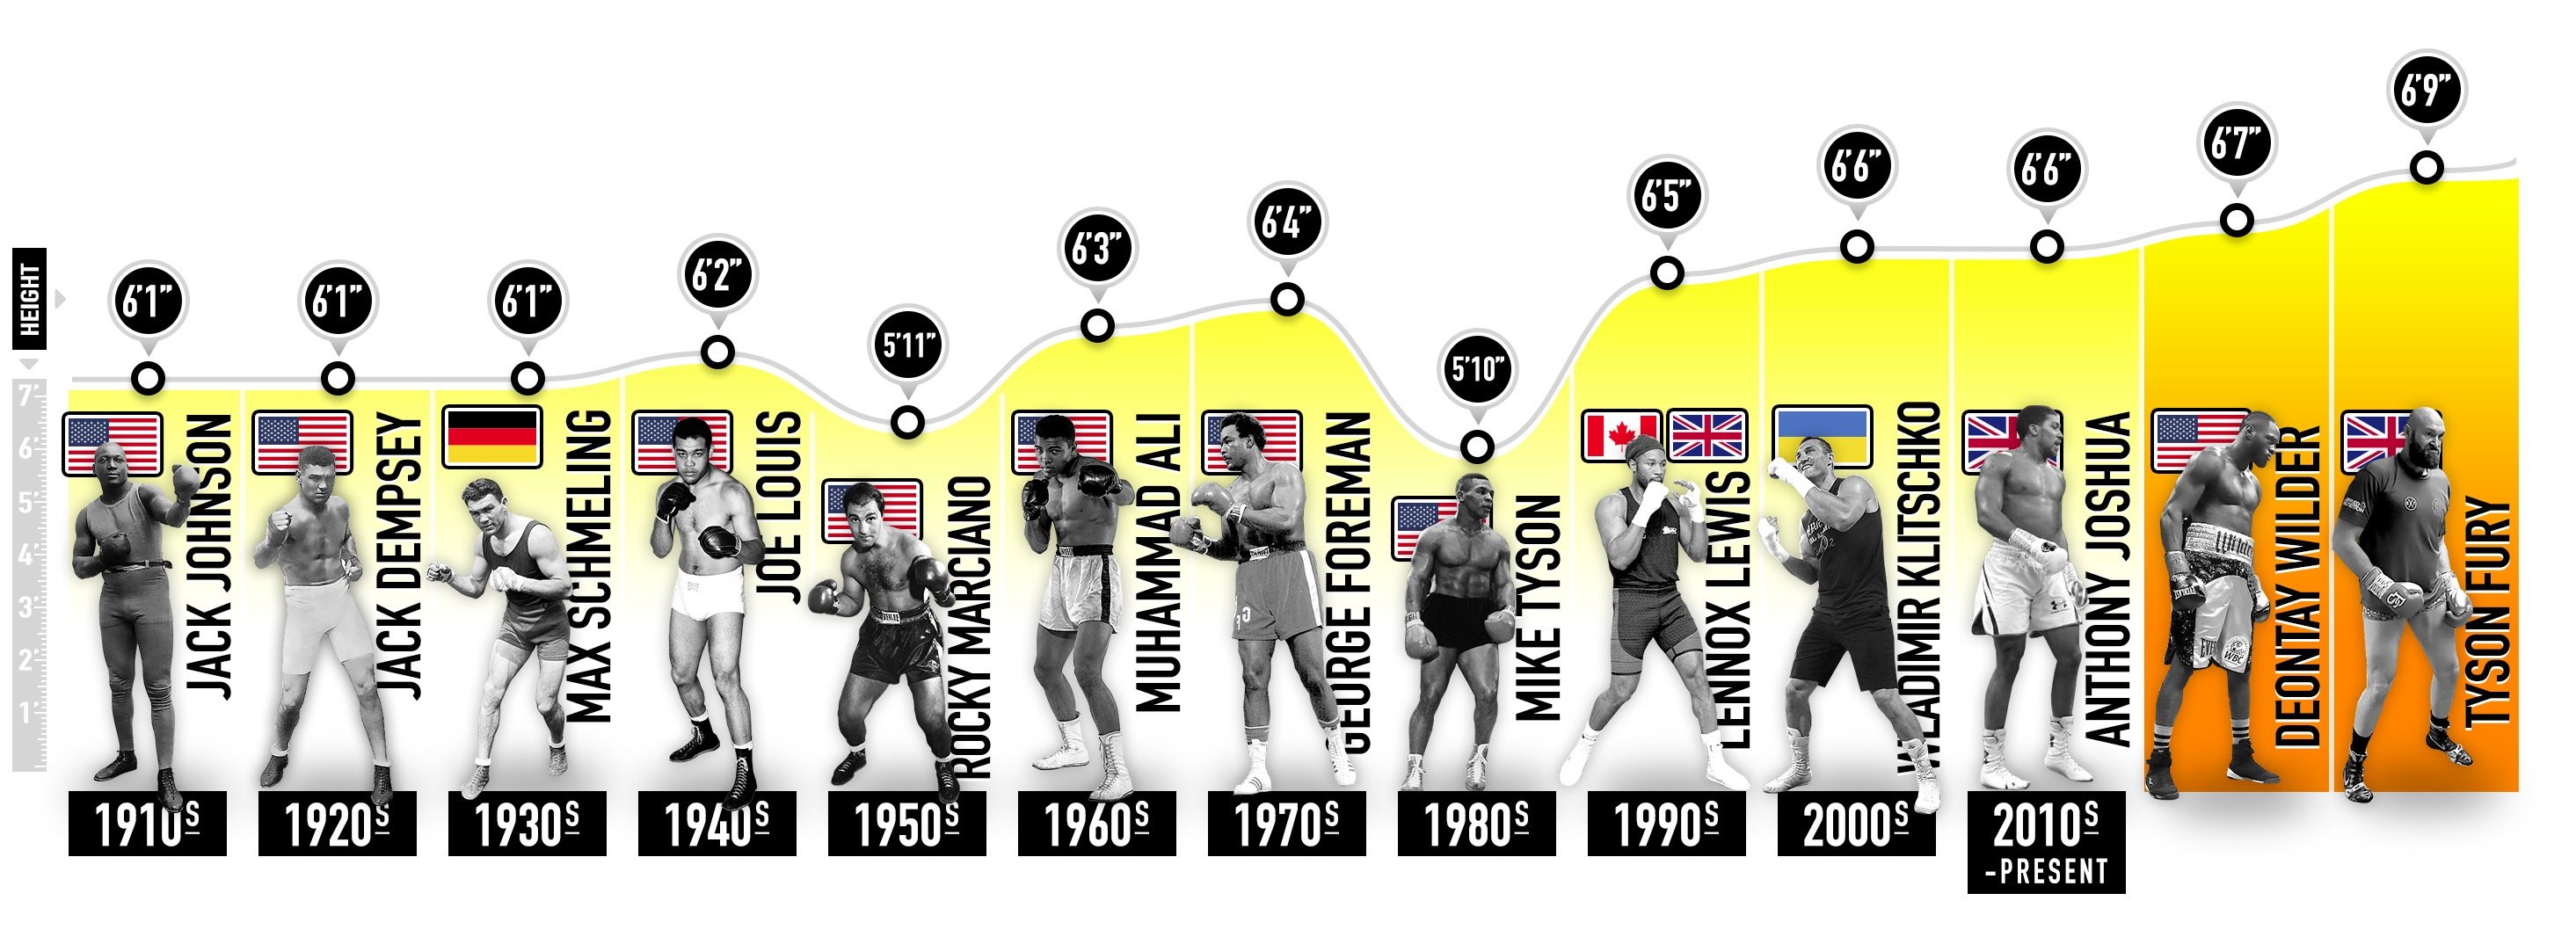 How the heights of heavyweight boxers has changed over time